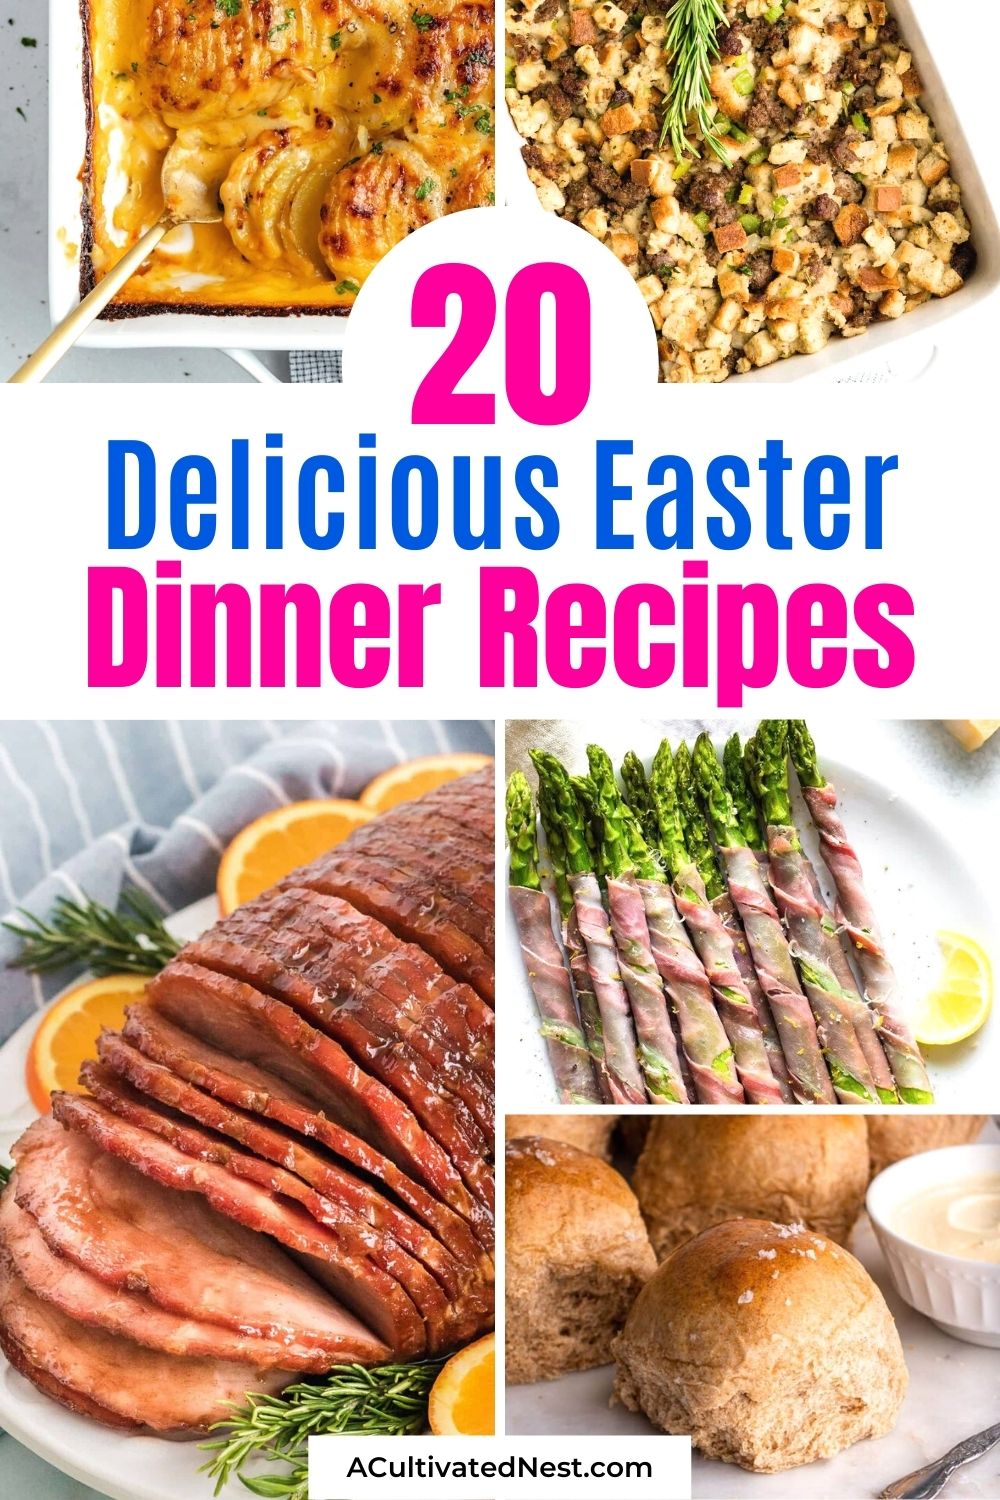 20 Delicious Easter Dinner Recipes